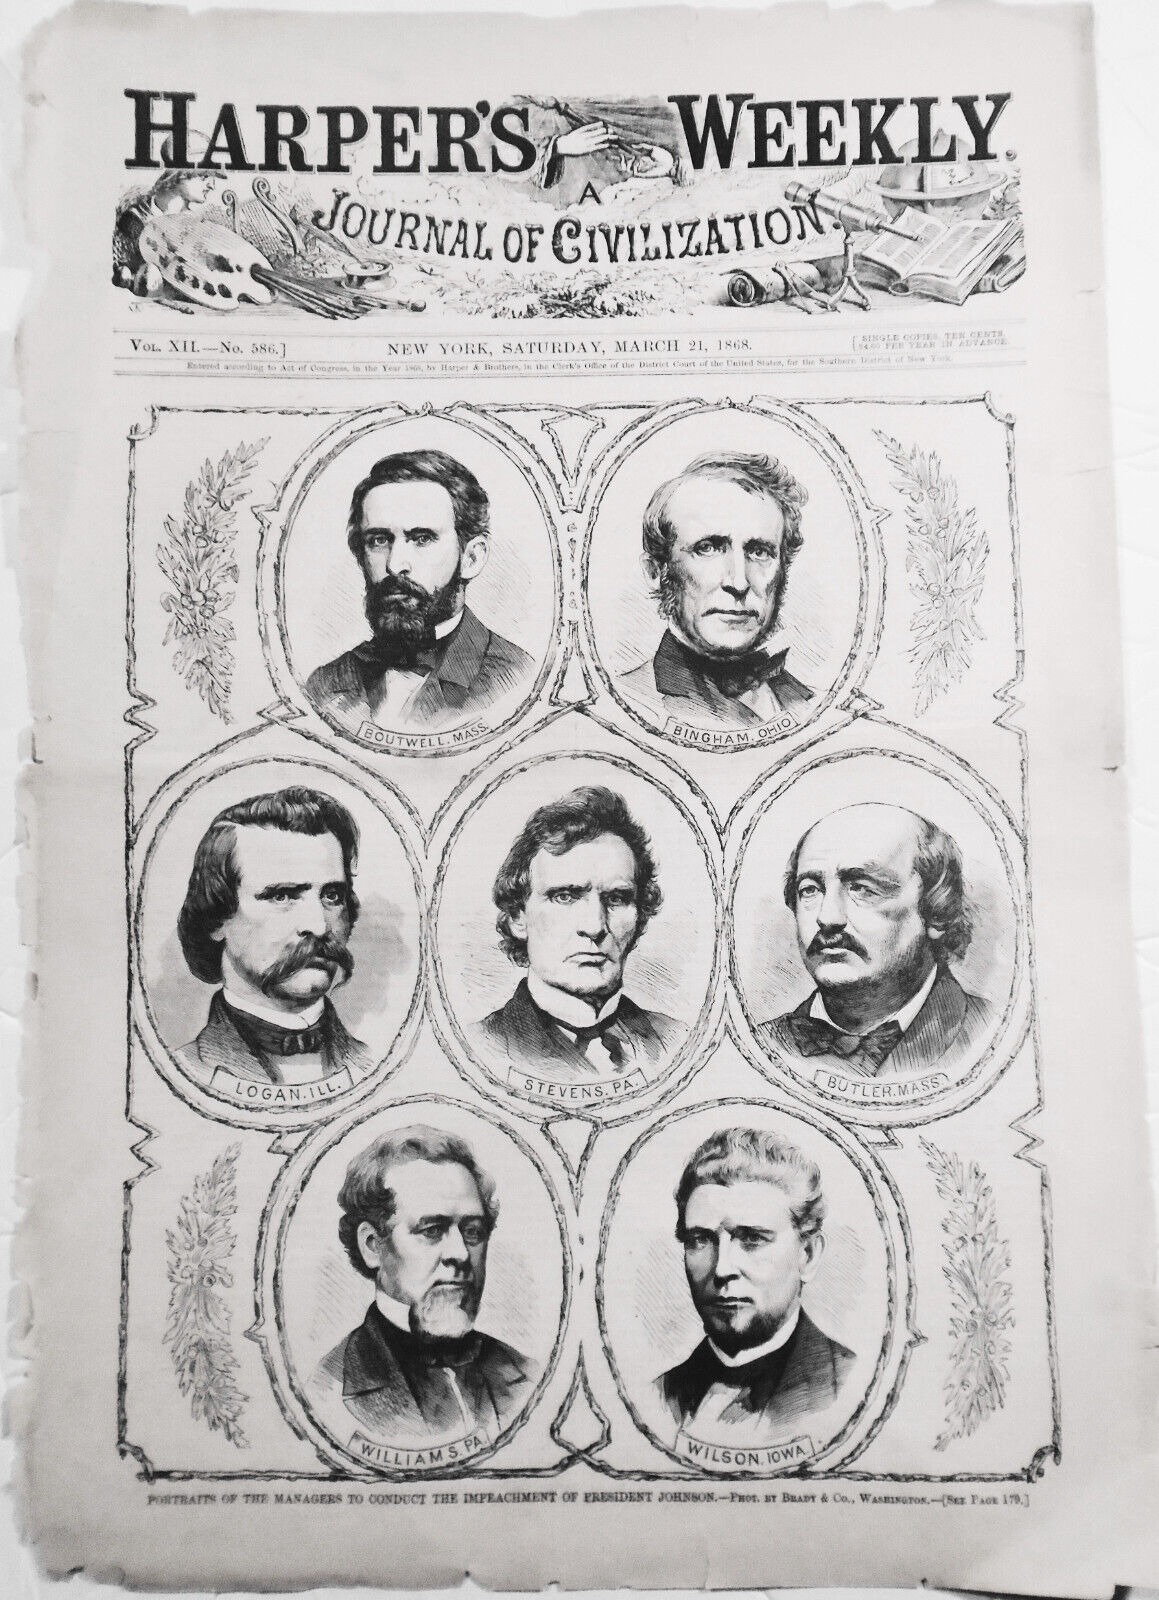 Portraits of Managers to Conduct Impeachment of President Johnson - Brady, 1868